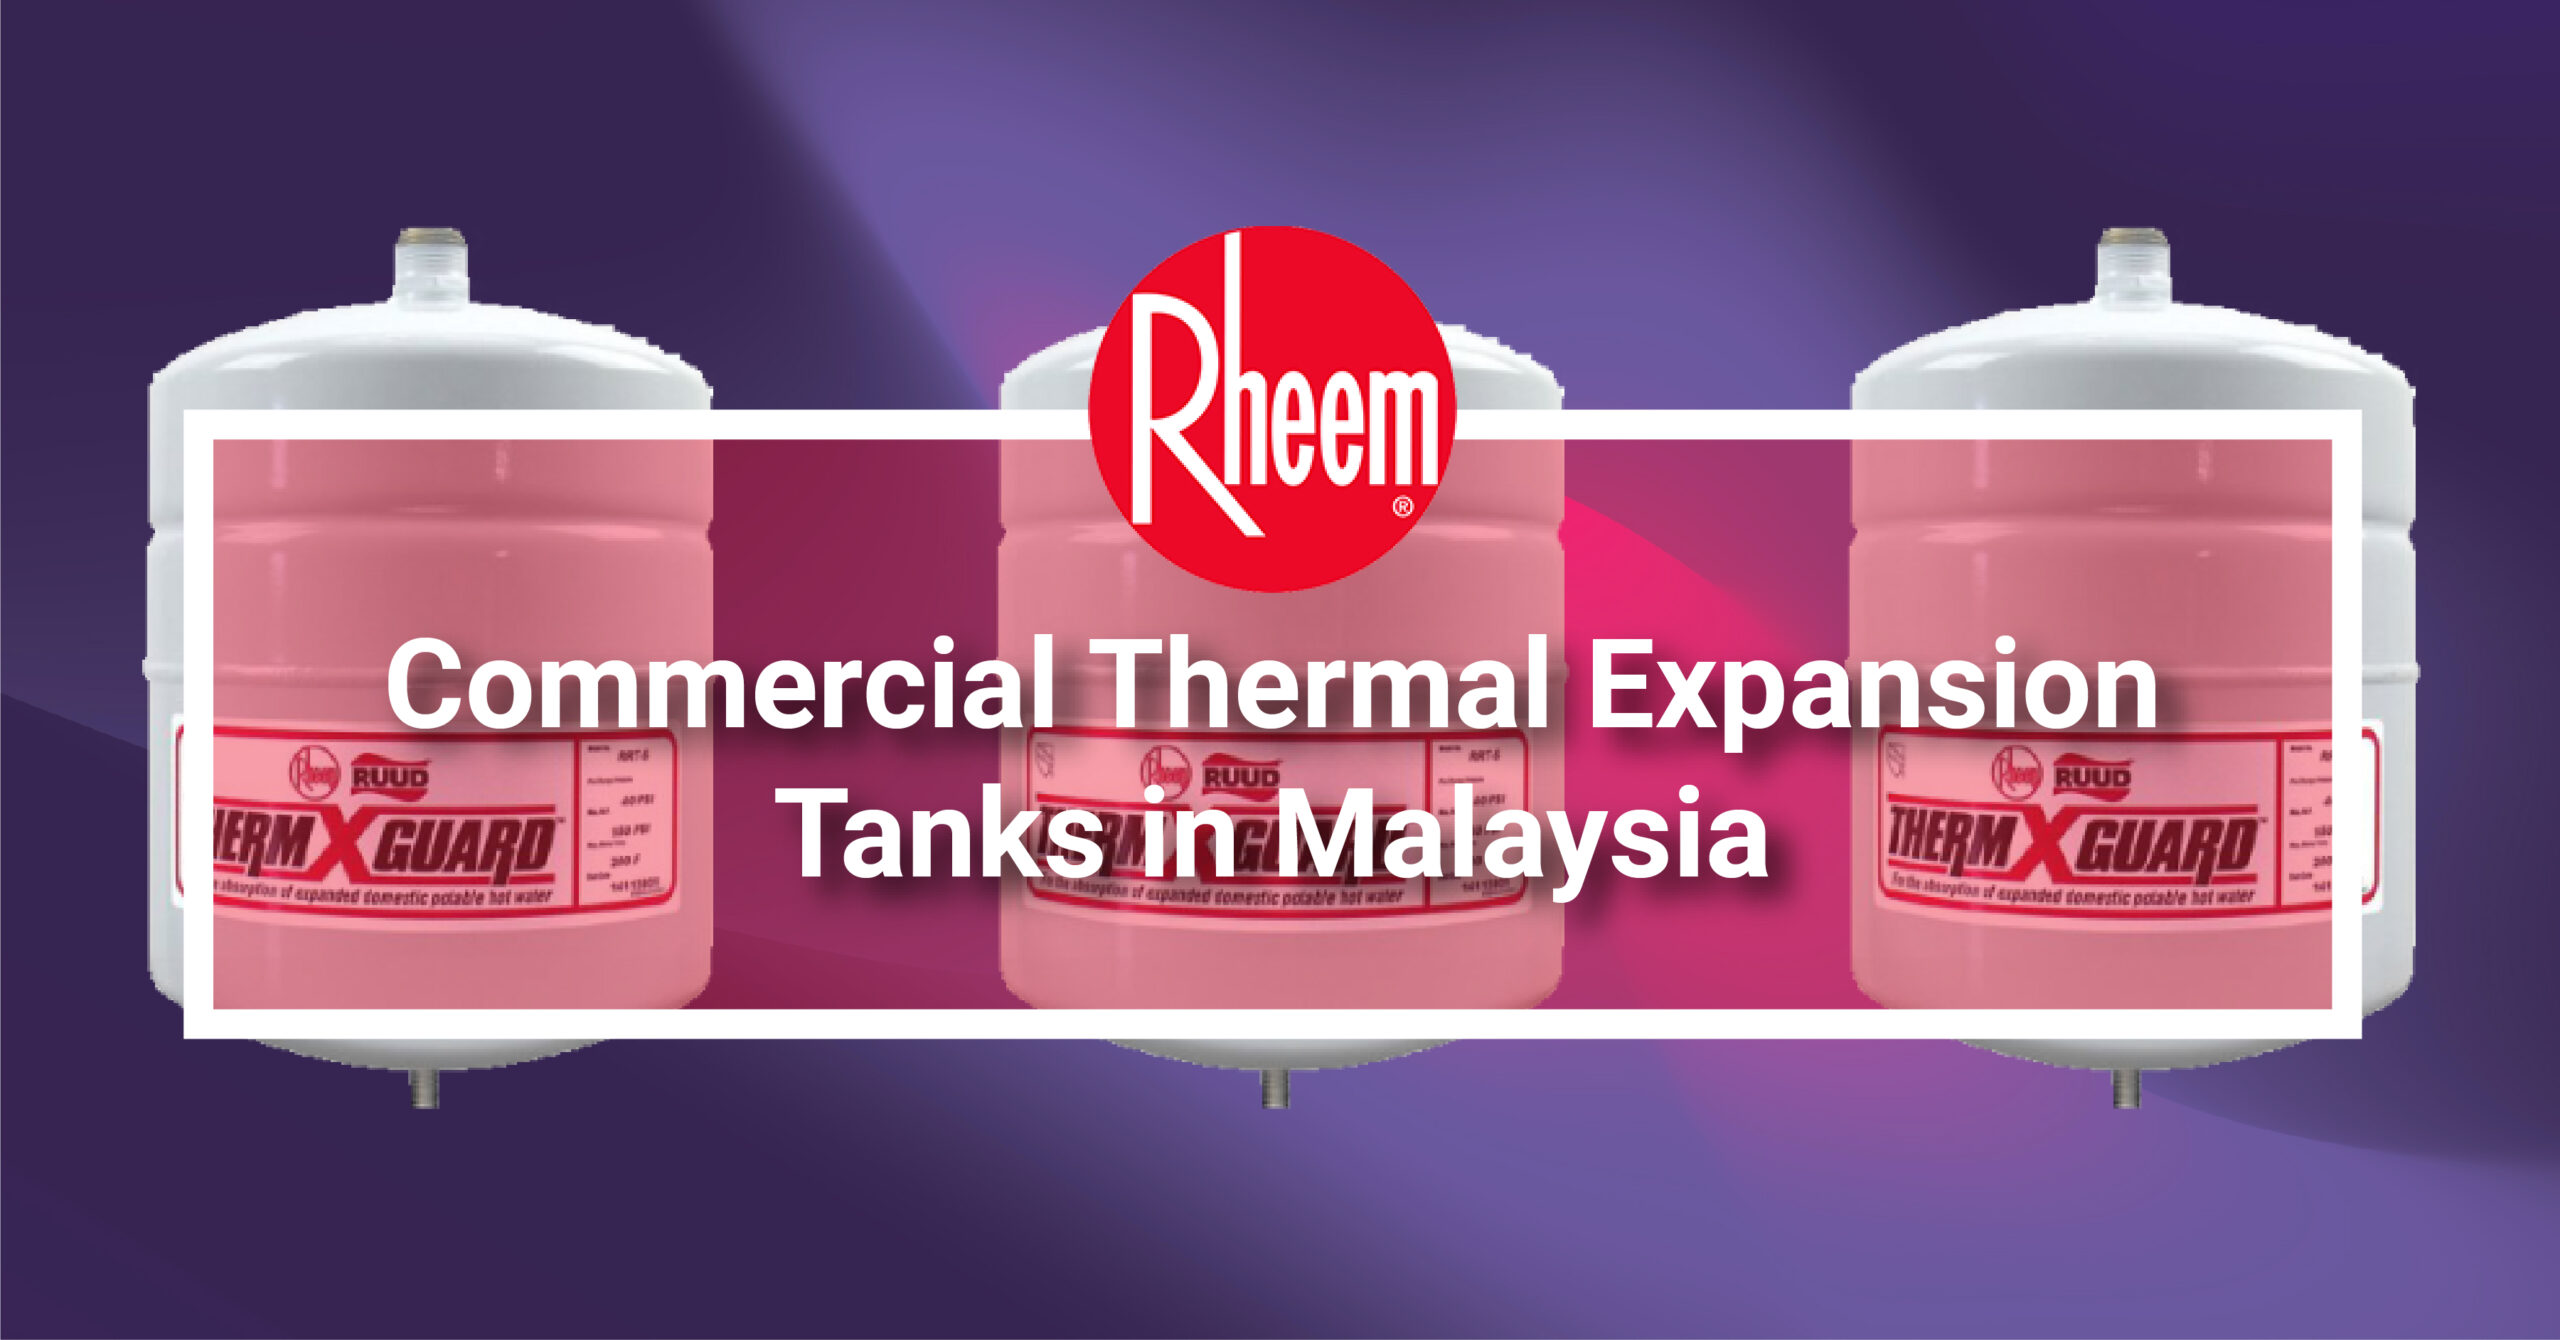 Commercial Thermal Expansion Tanks in Malaysia - Rheem Malaysia